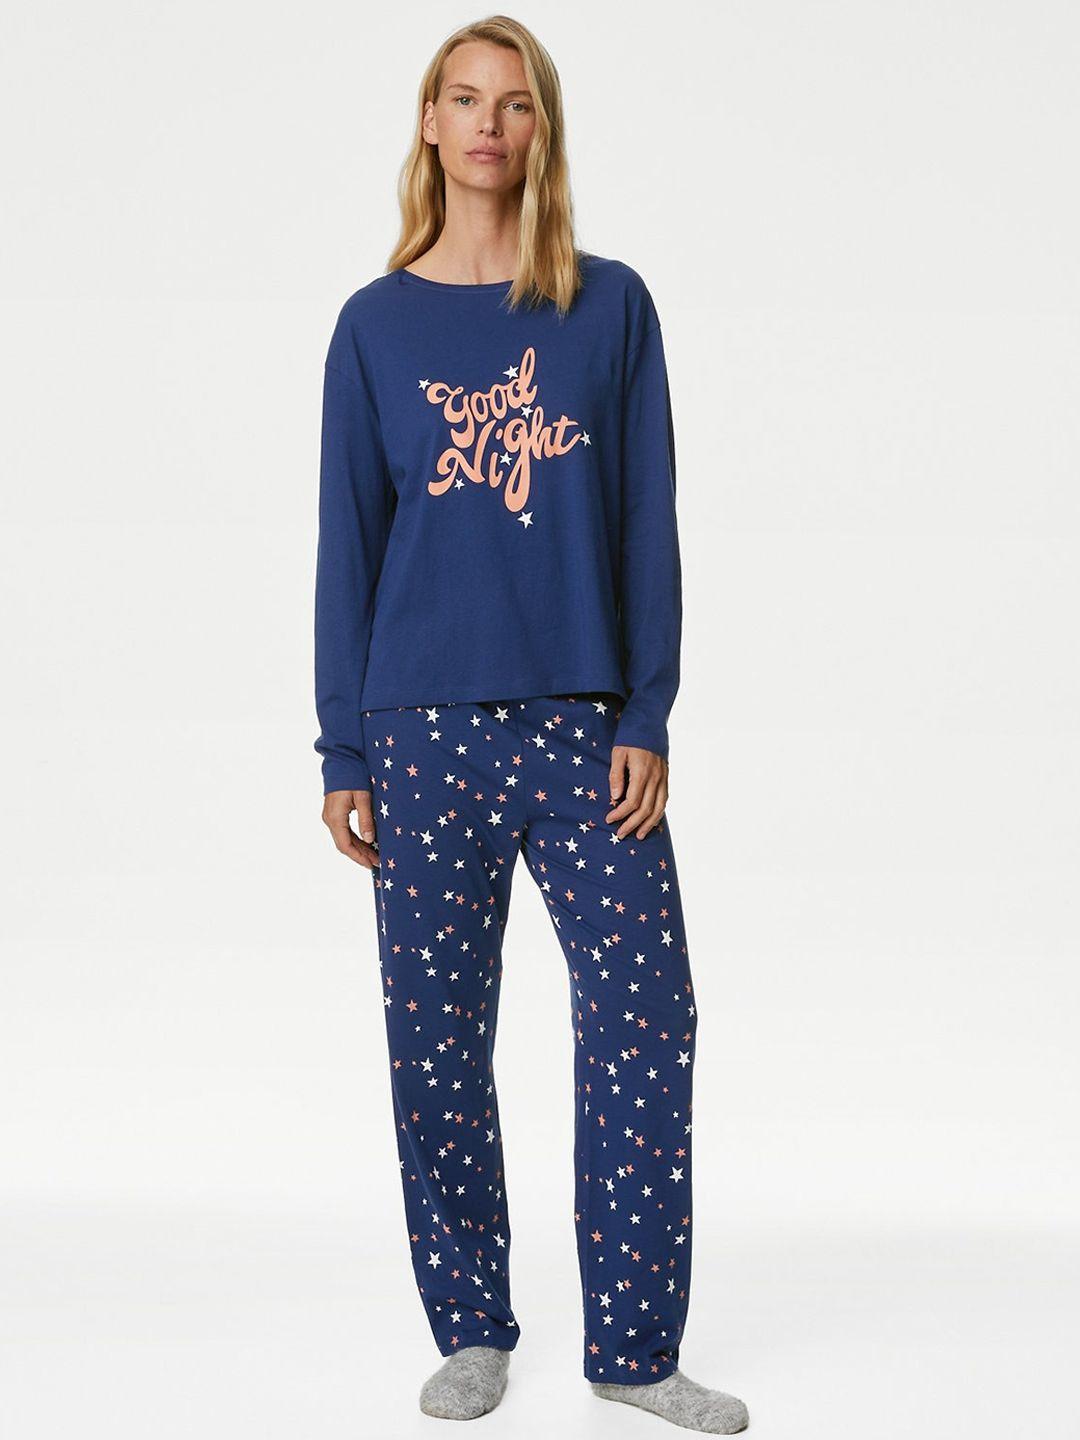 marks & spencer typography printed night suit